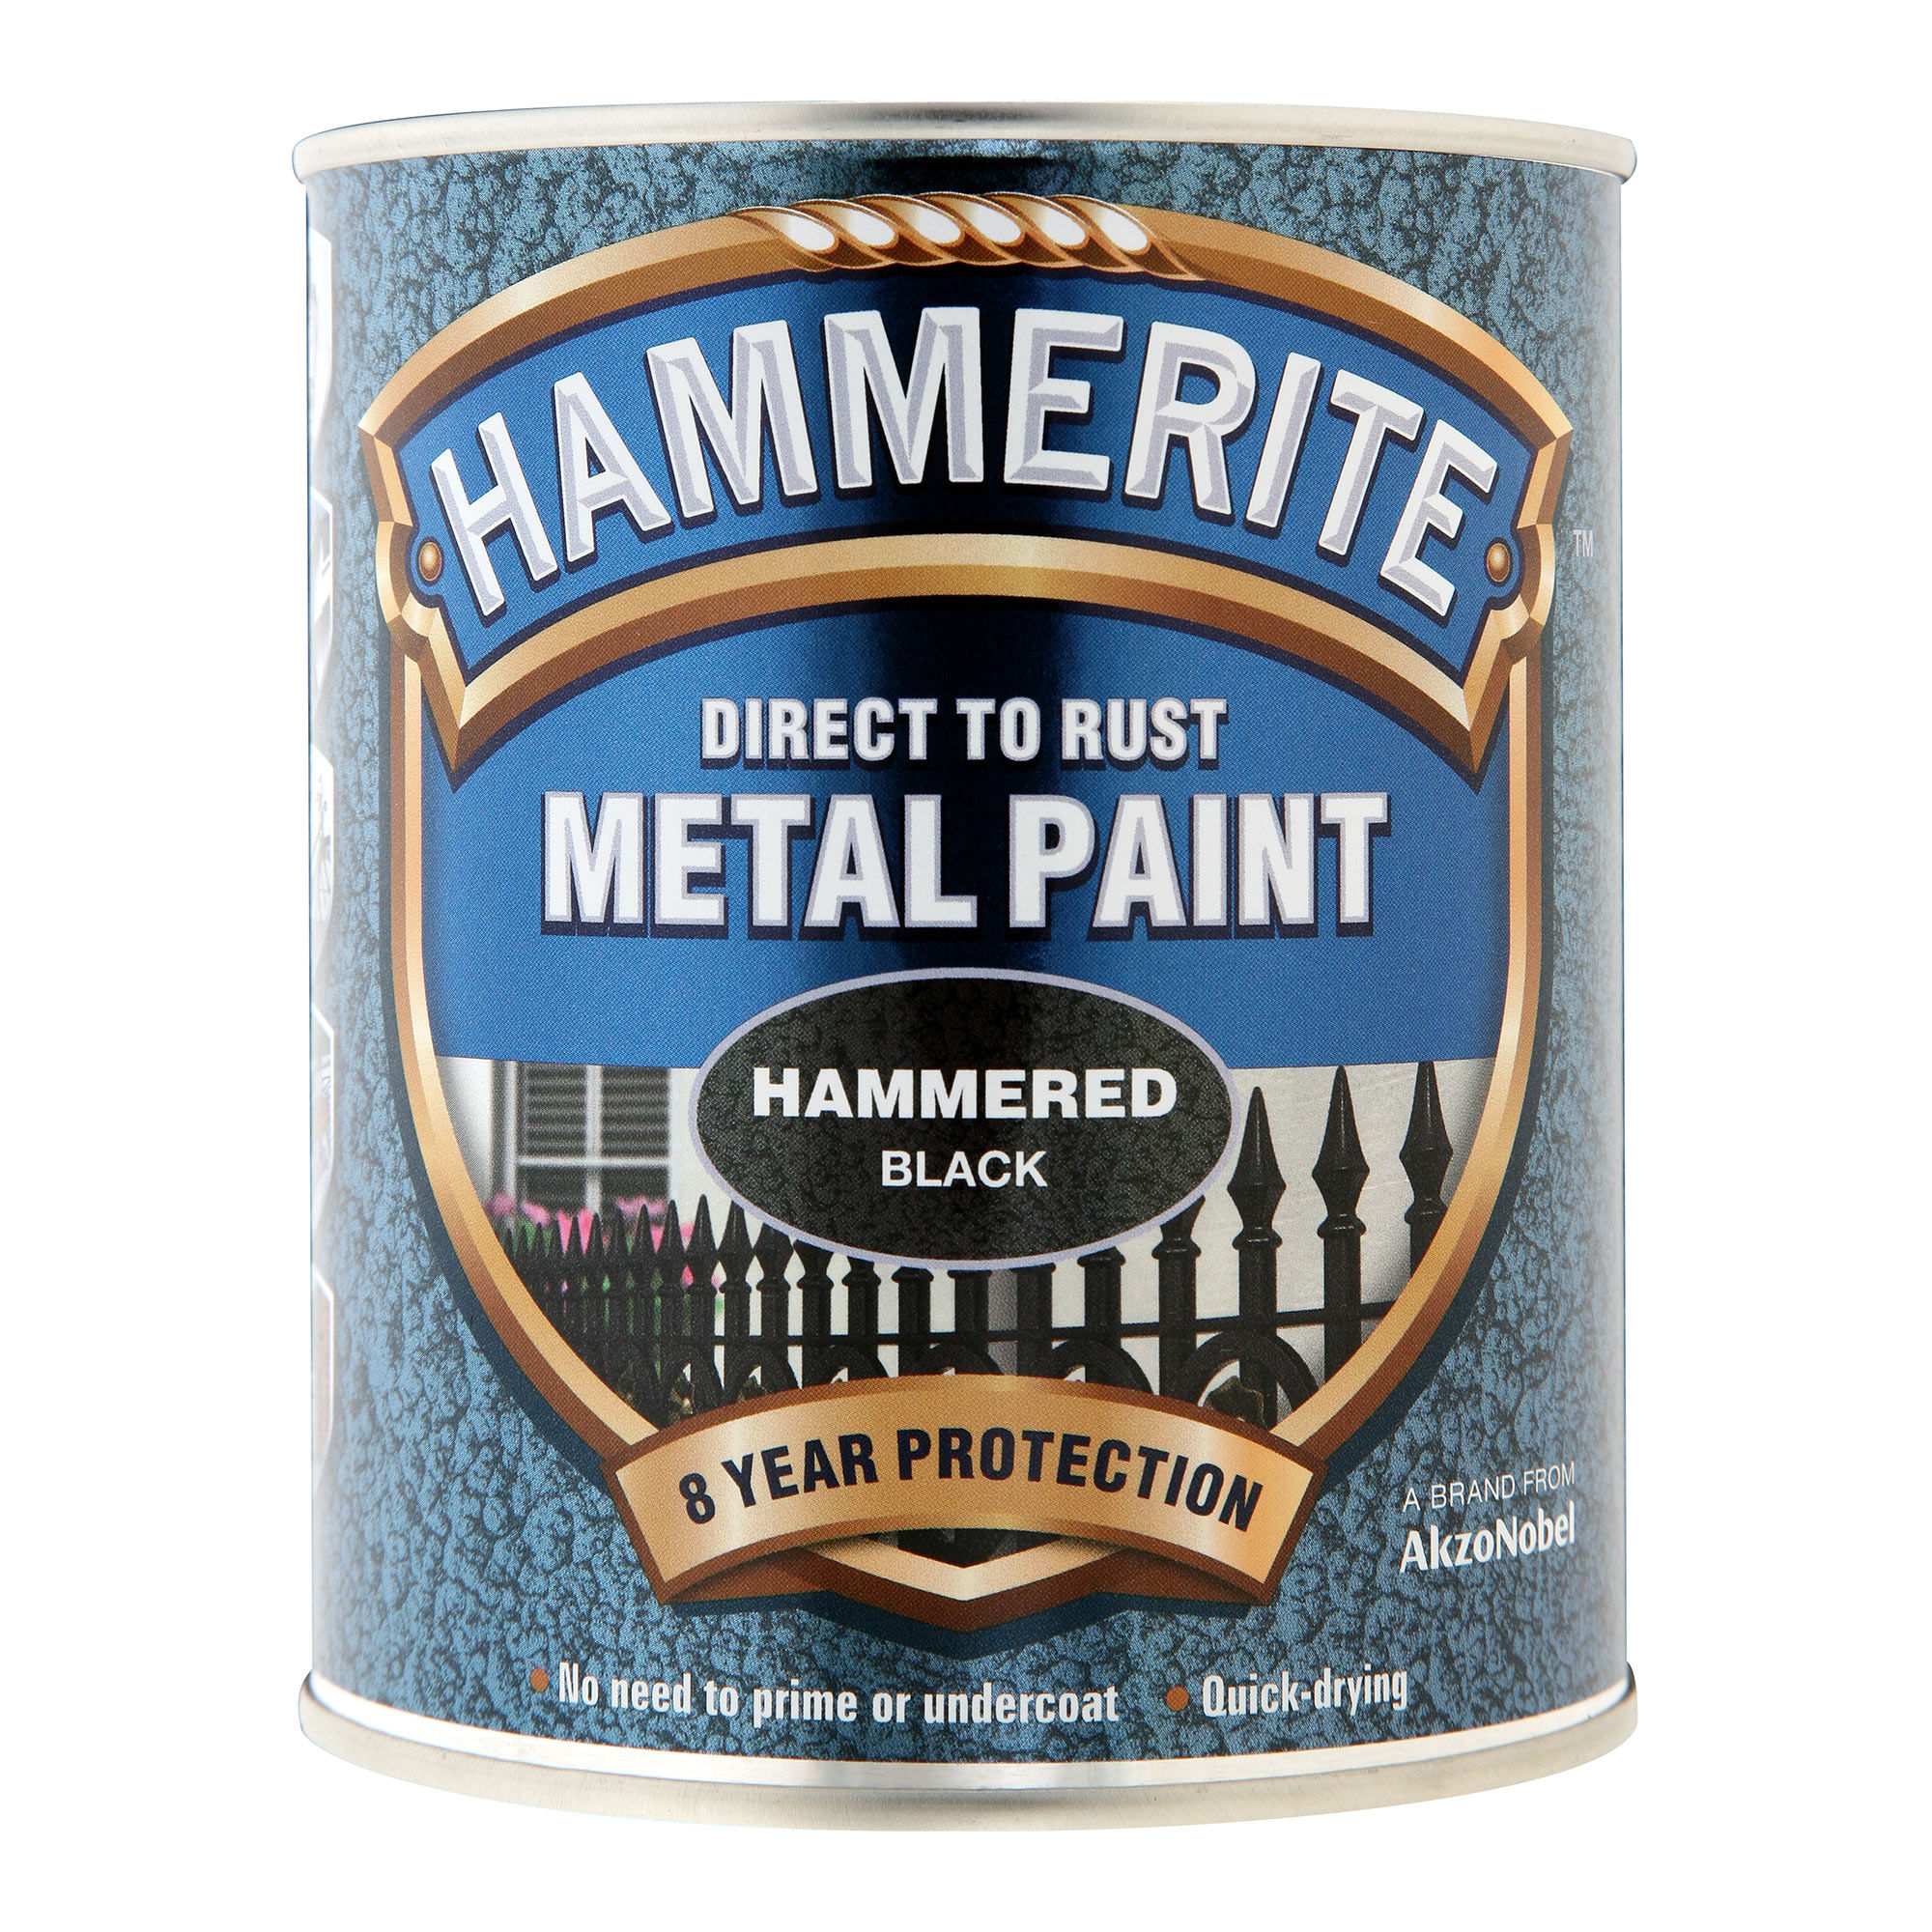 Hammerite Direct to Rust Metal Paint Hammered Finish Black